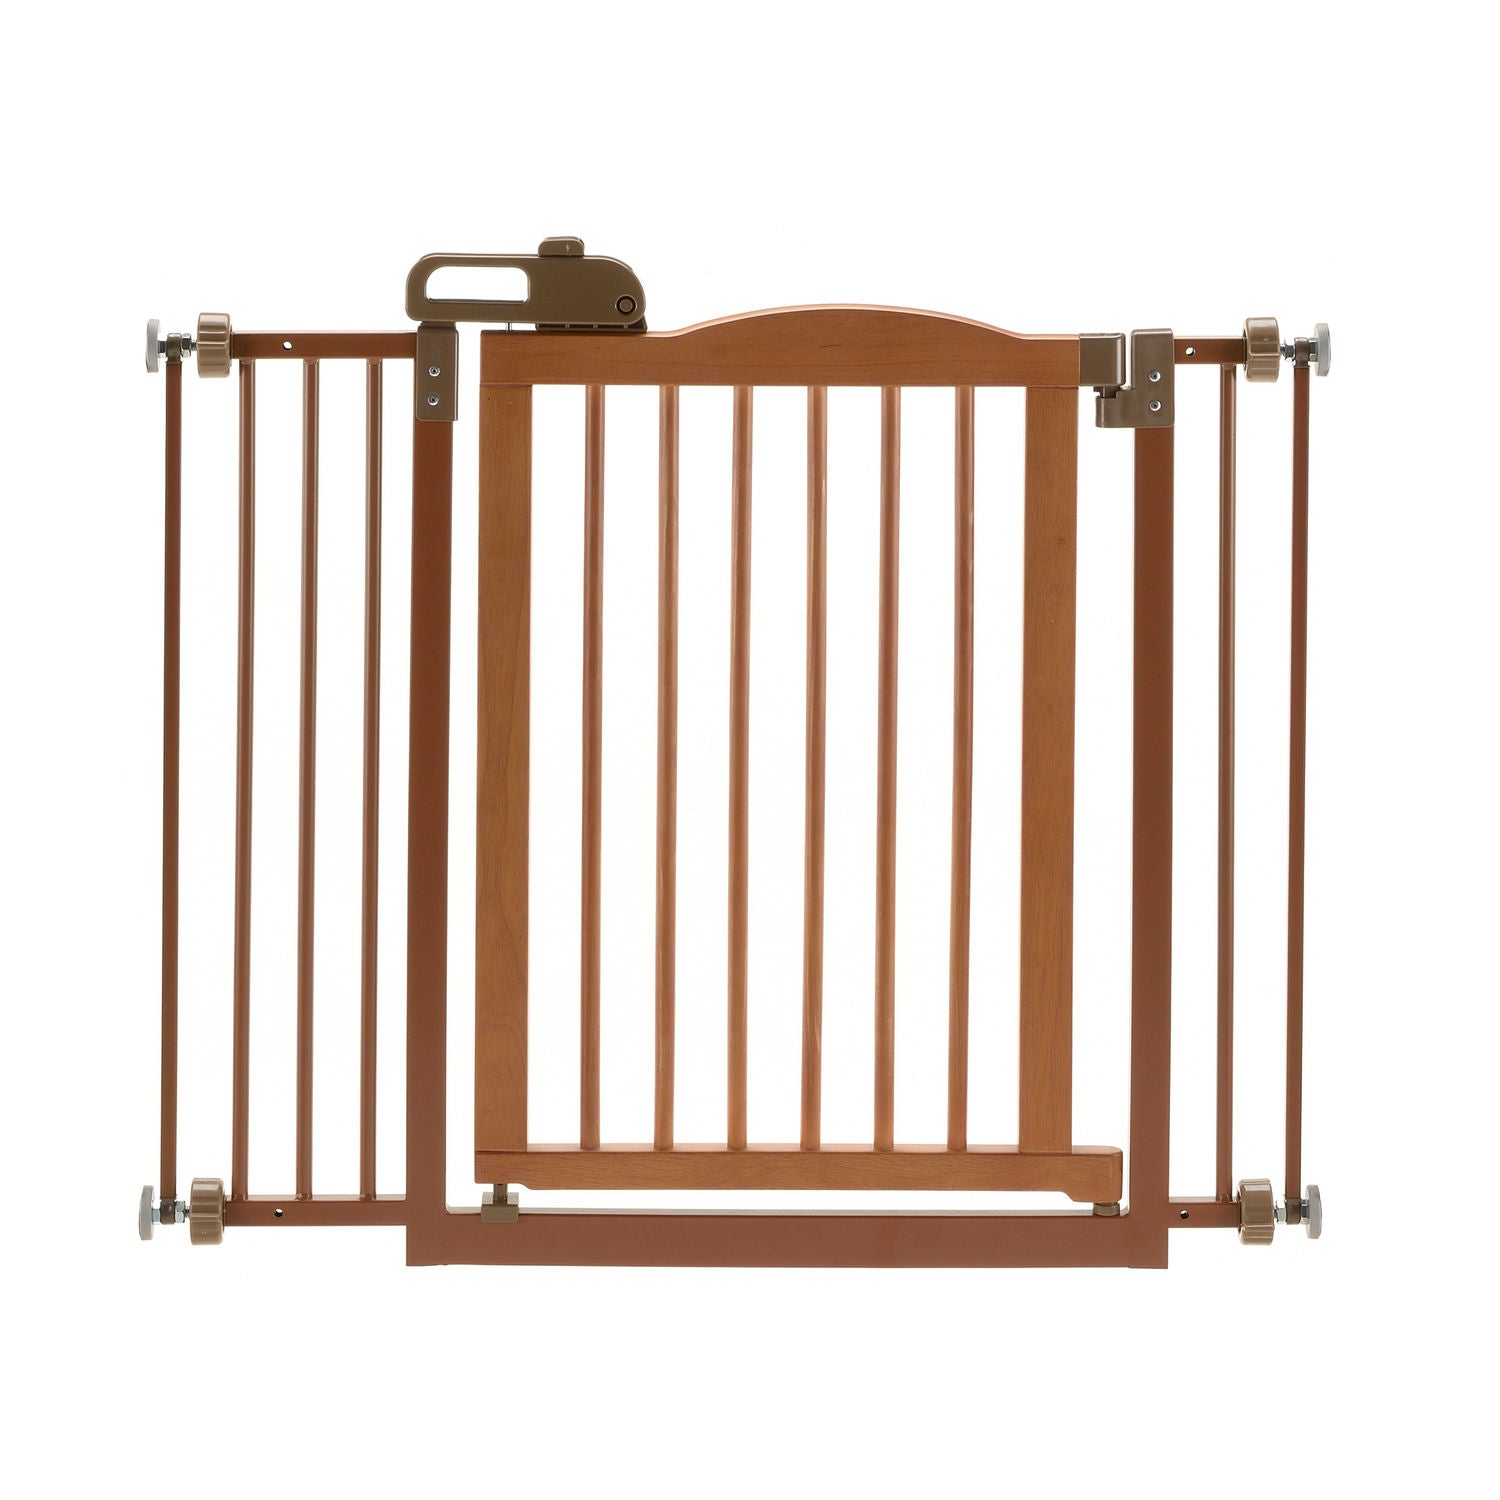 Richell R94928 One-touch Pressure Pet Gate Ii